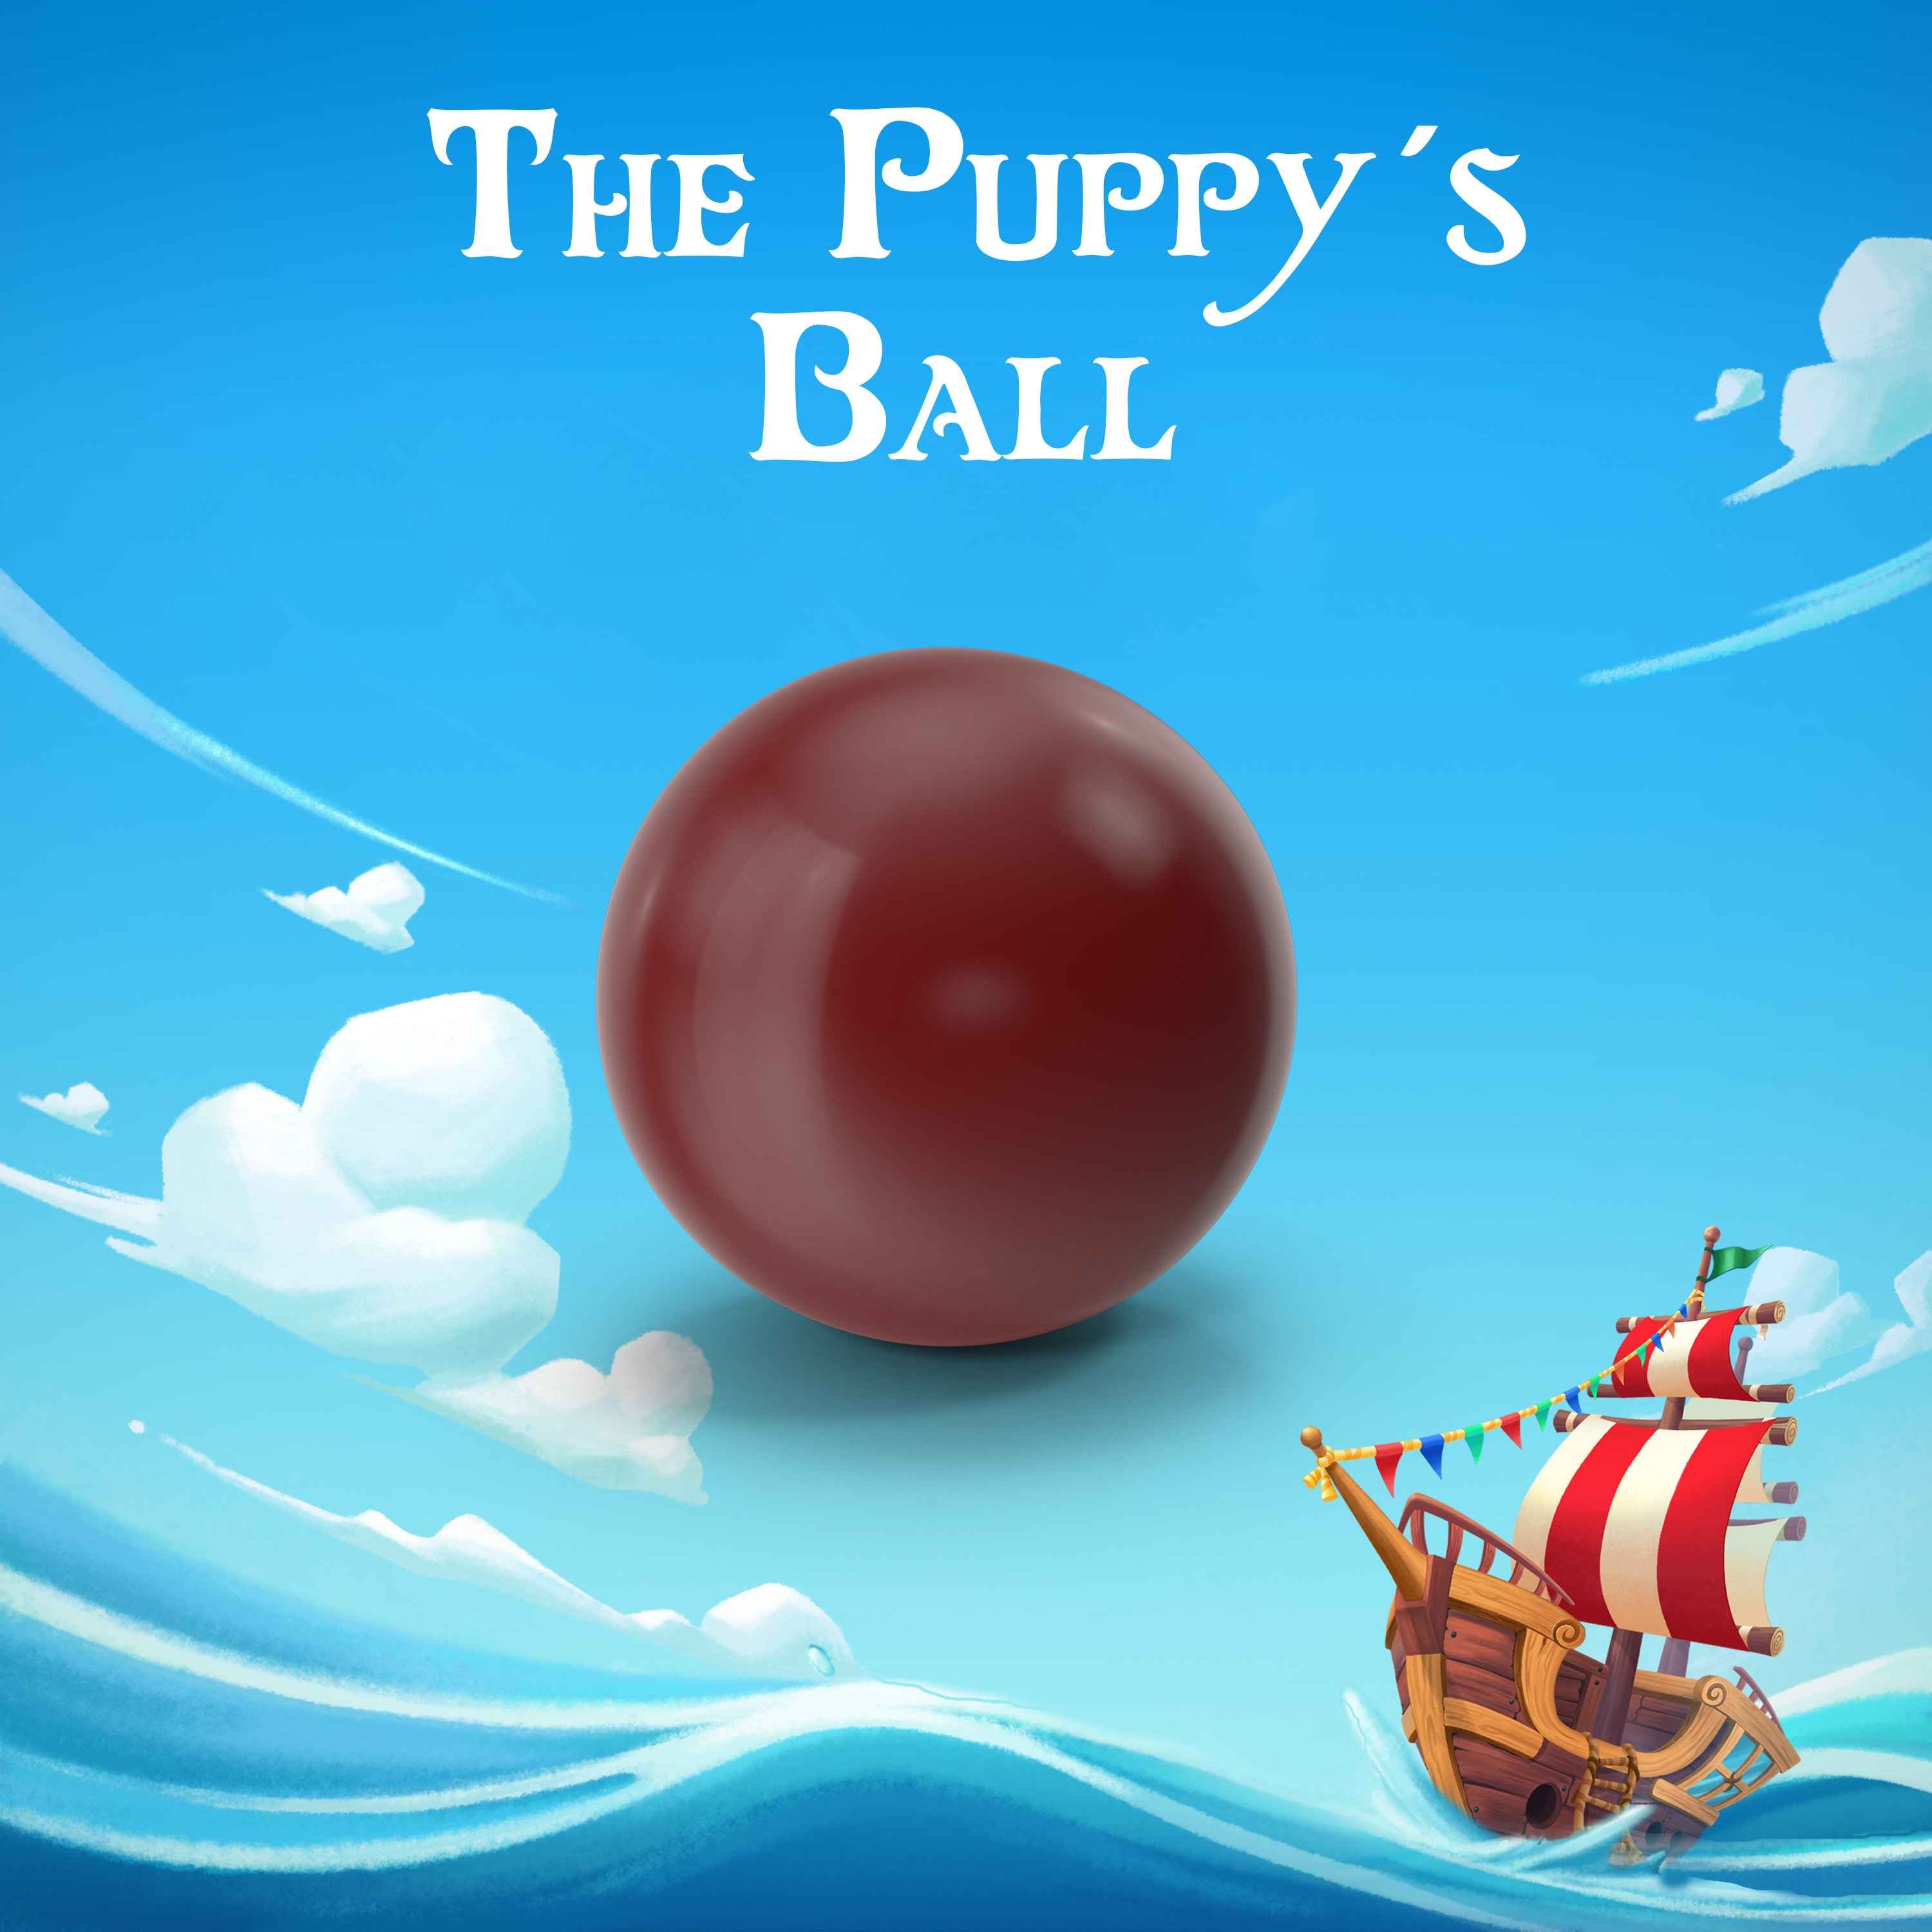 The Puppy’s Ball